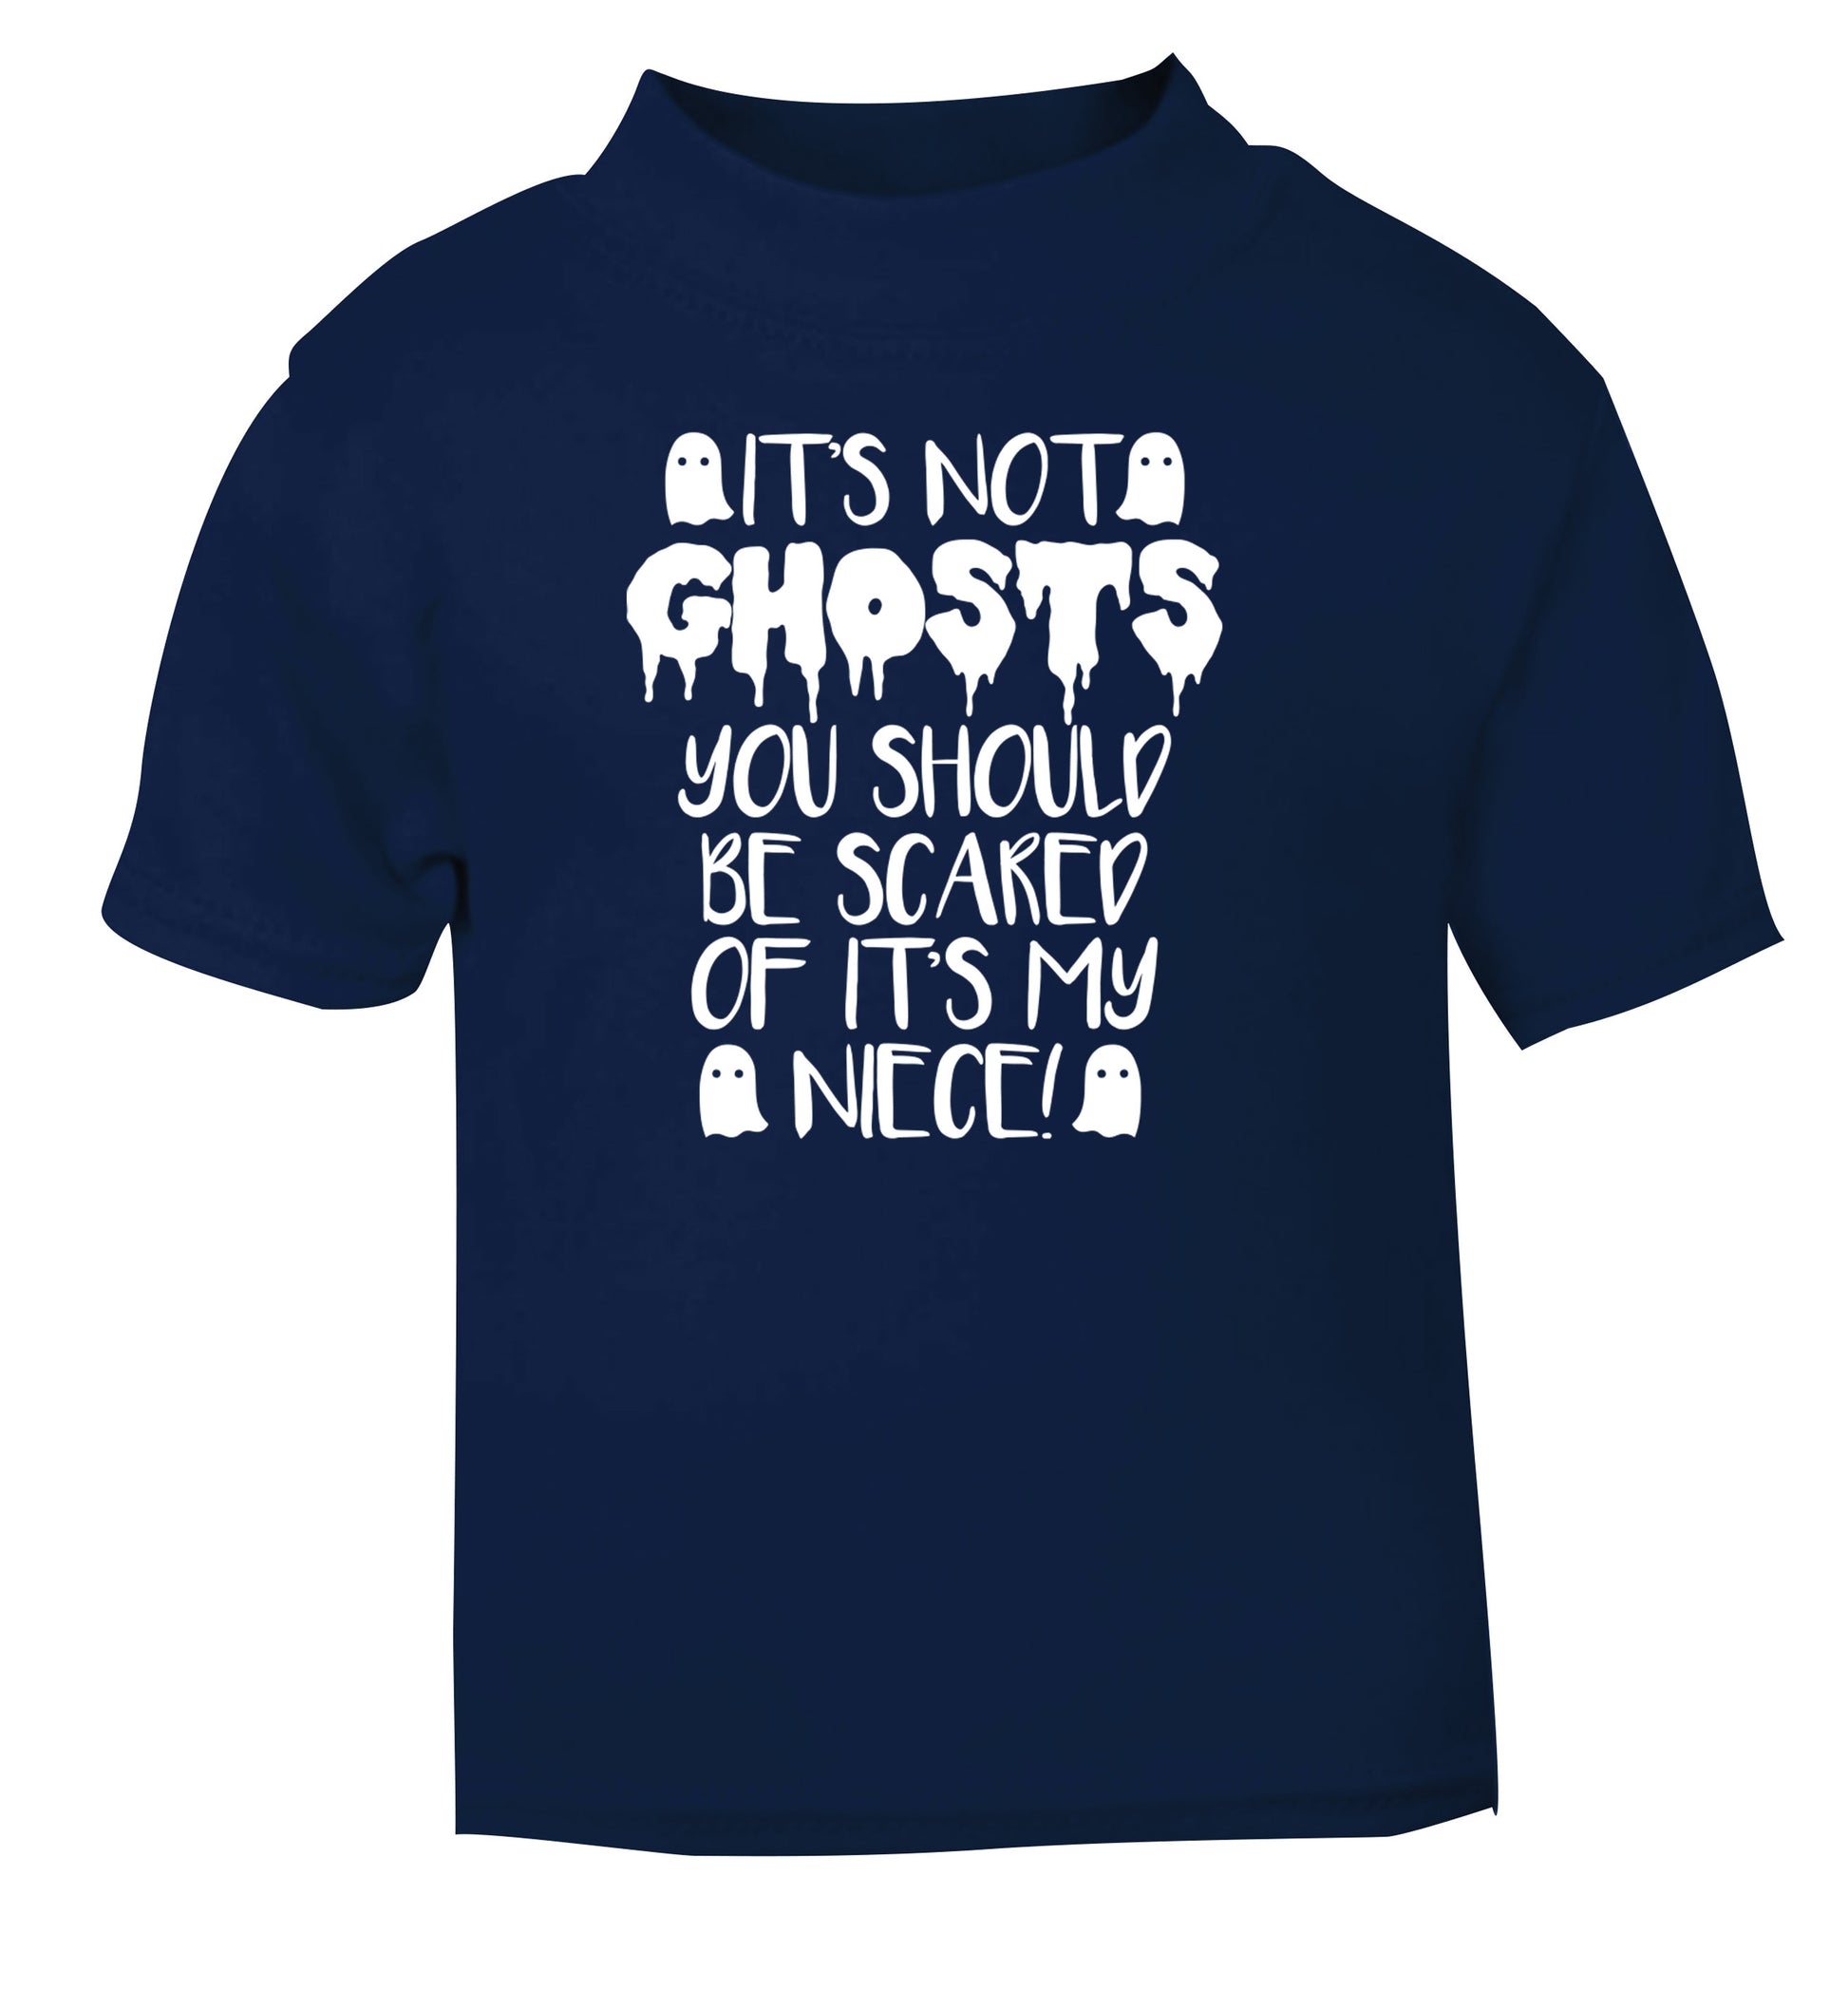 It's not ghosts you should be scared of it's my niece! navy Baby Toddler Tshirt 2 Years